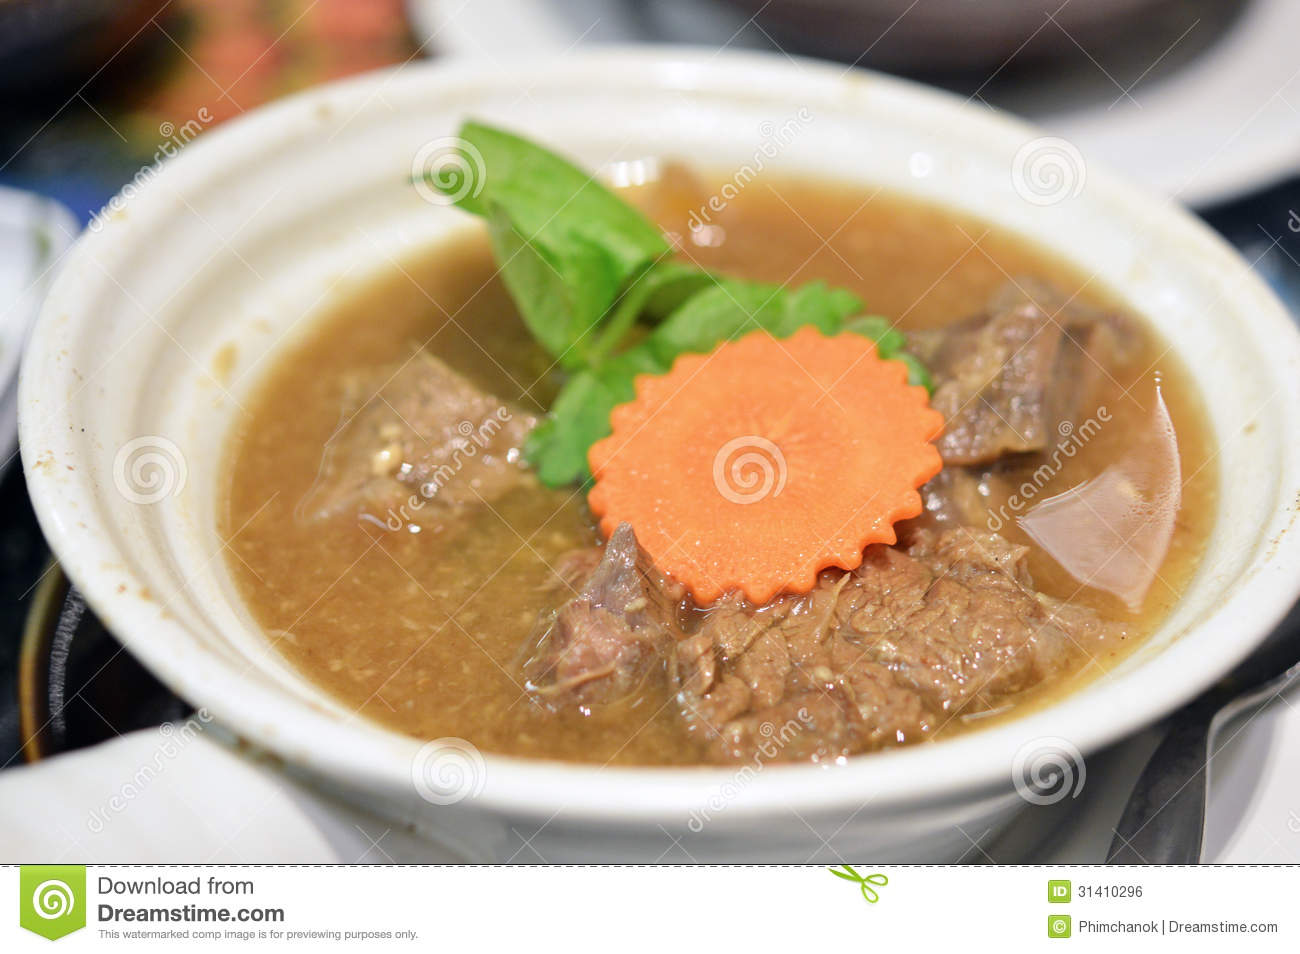 Beef Stew Royalty Free Stock Image   Image  31410296